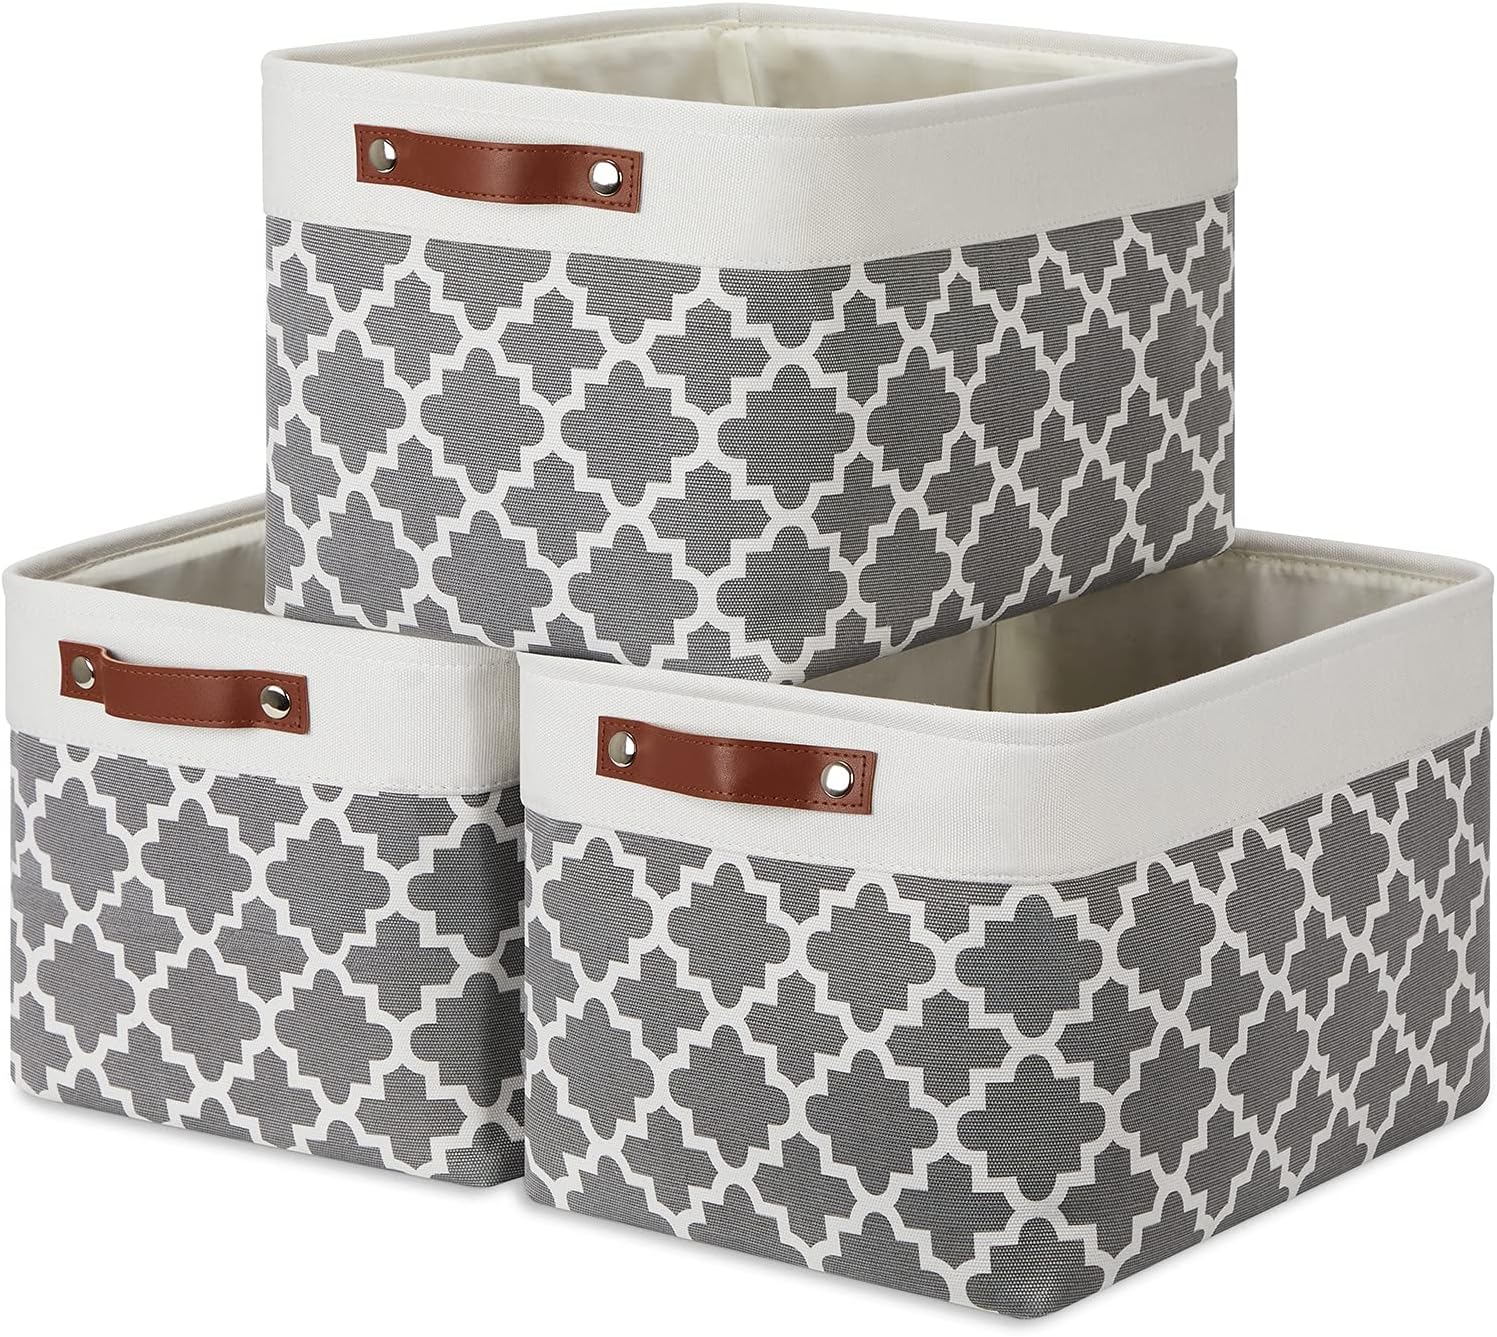 Temary Storage Baskets 3 Pack Storage Organizer Bins Decorative Fabric Storage Boxes with Handles Canvas Storage Basket for Organizing Clothes, Toys, Books